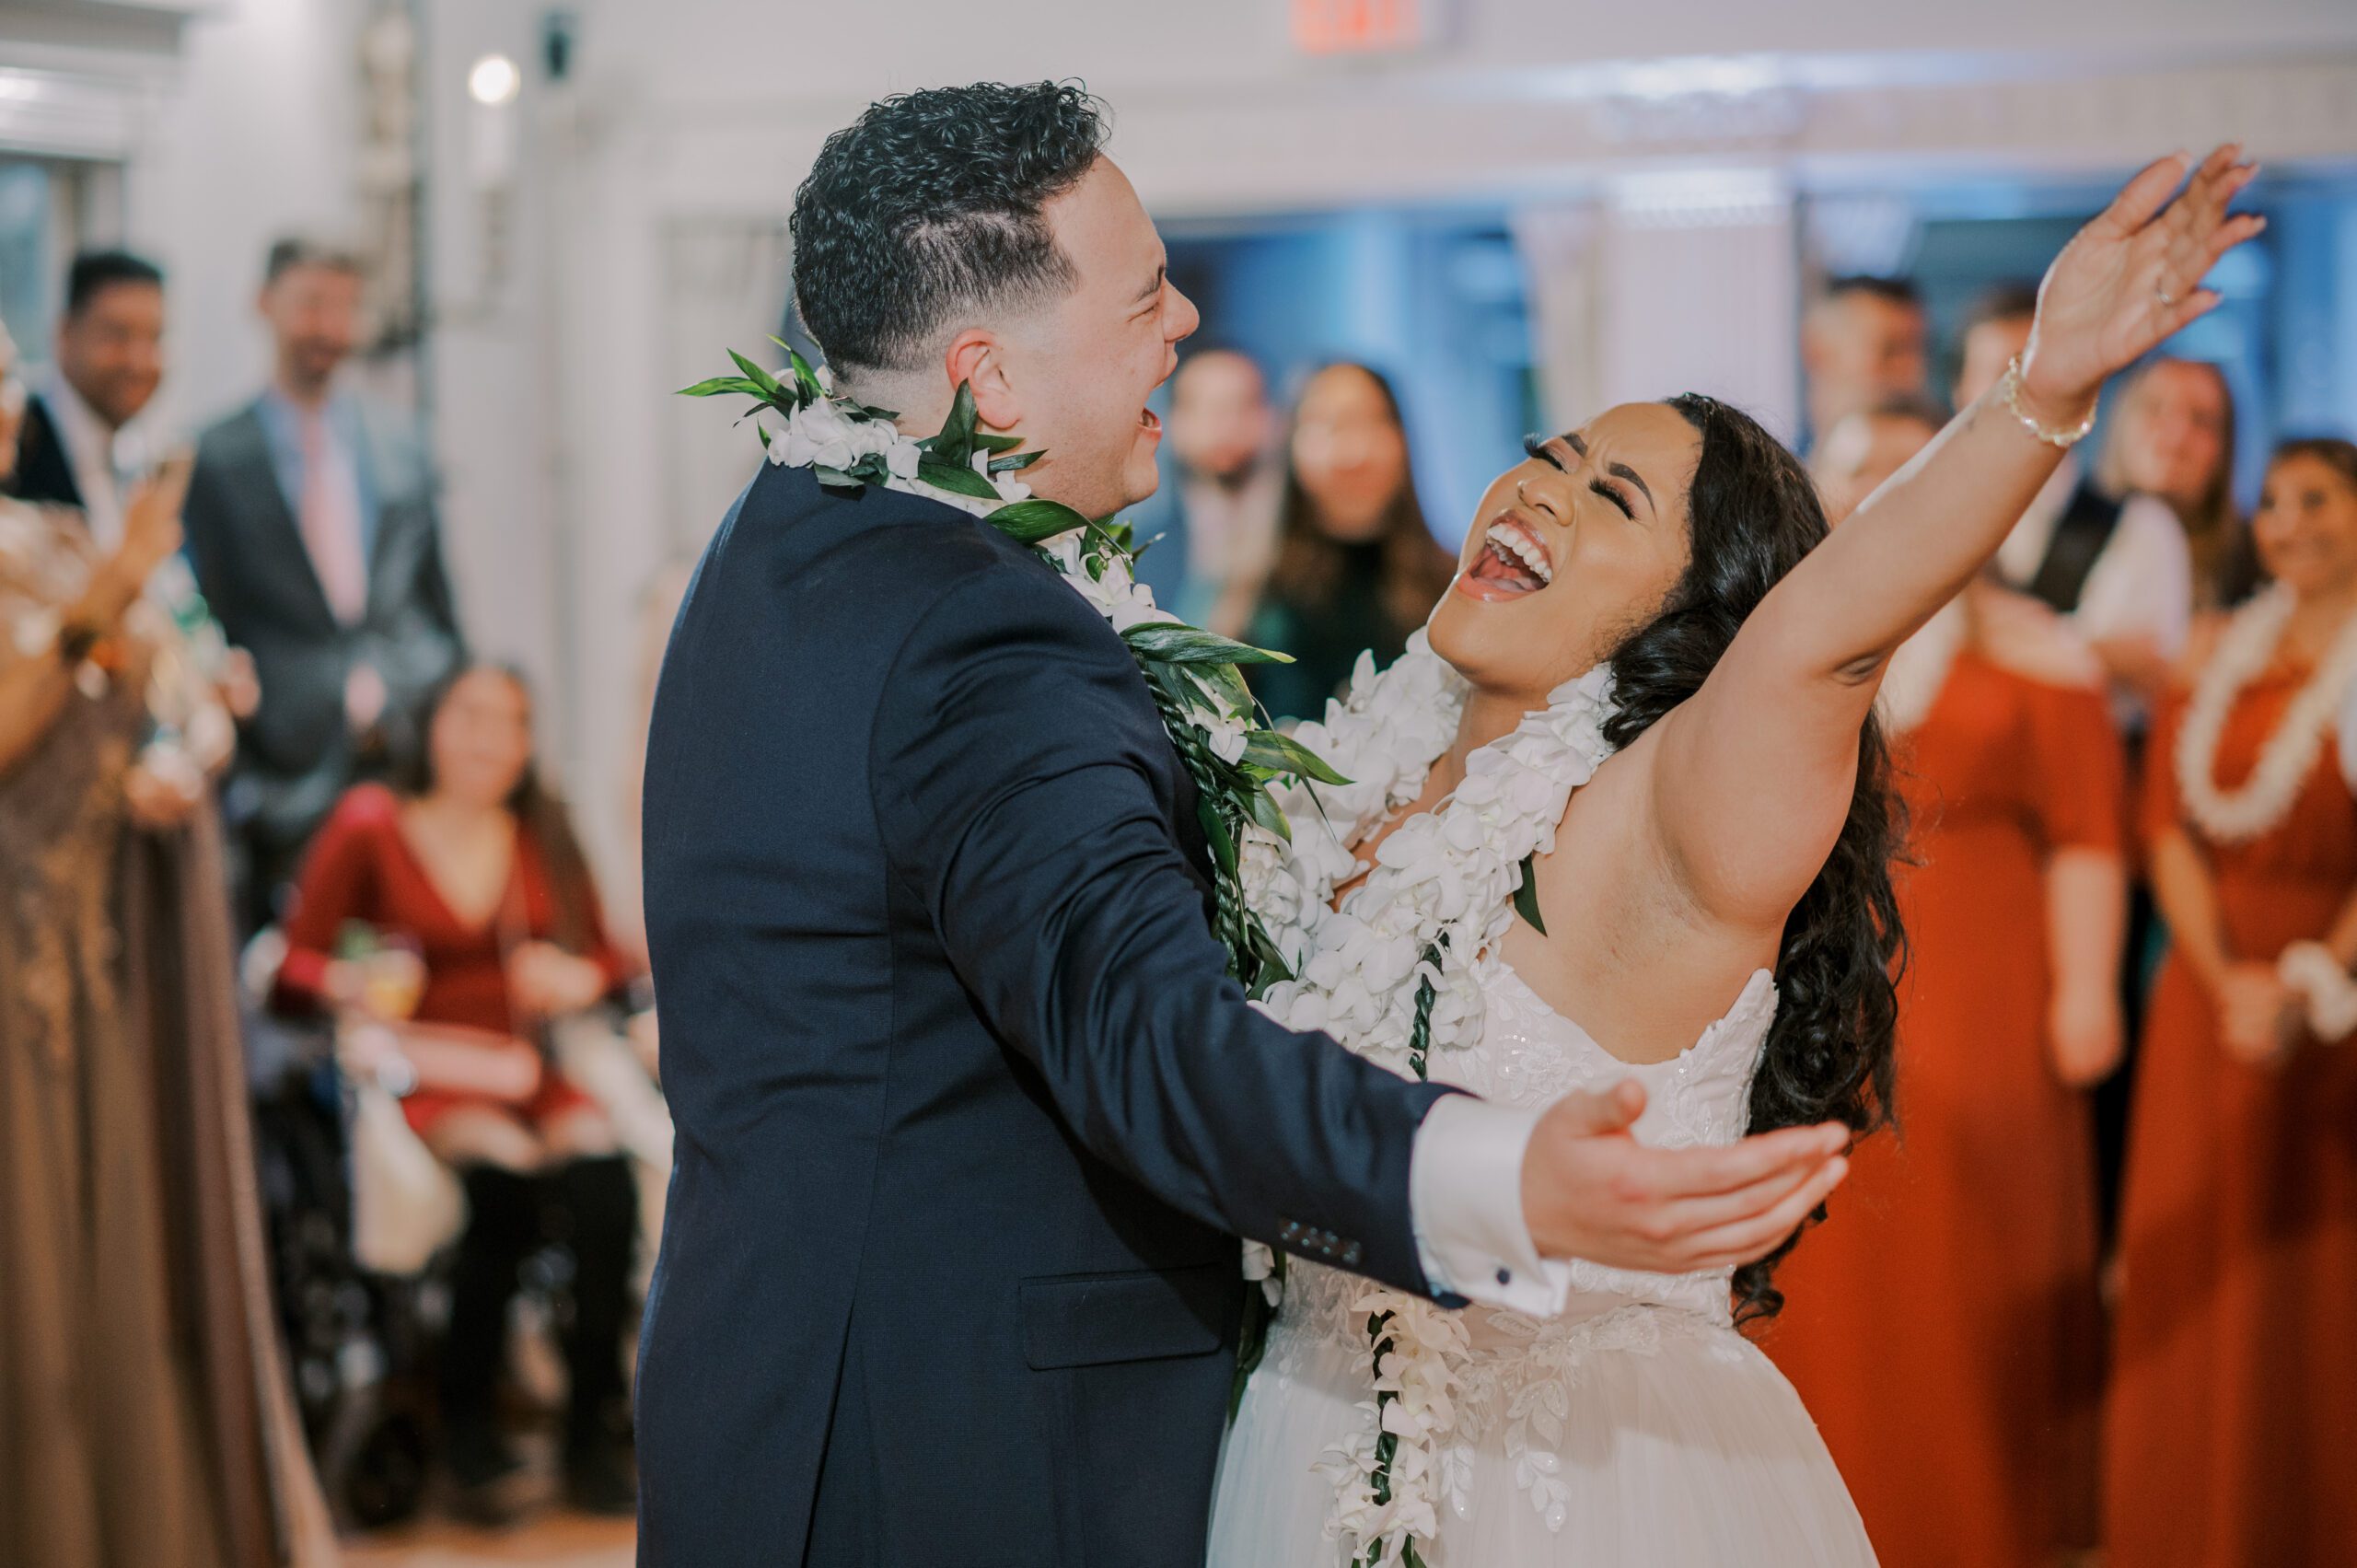 Bride and groom dancing, both singing passionately while bride throws her arm up in the air